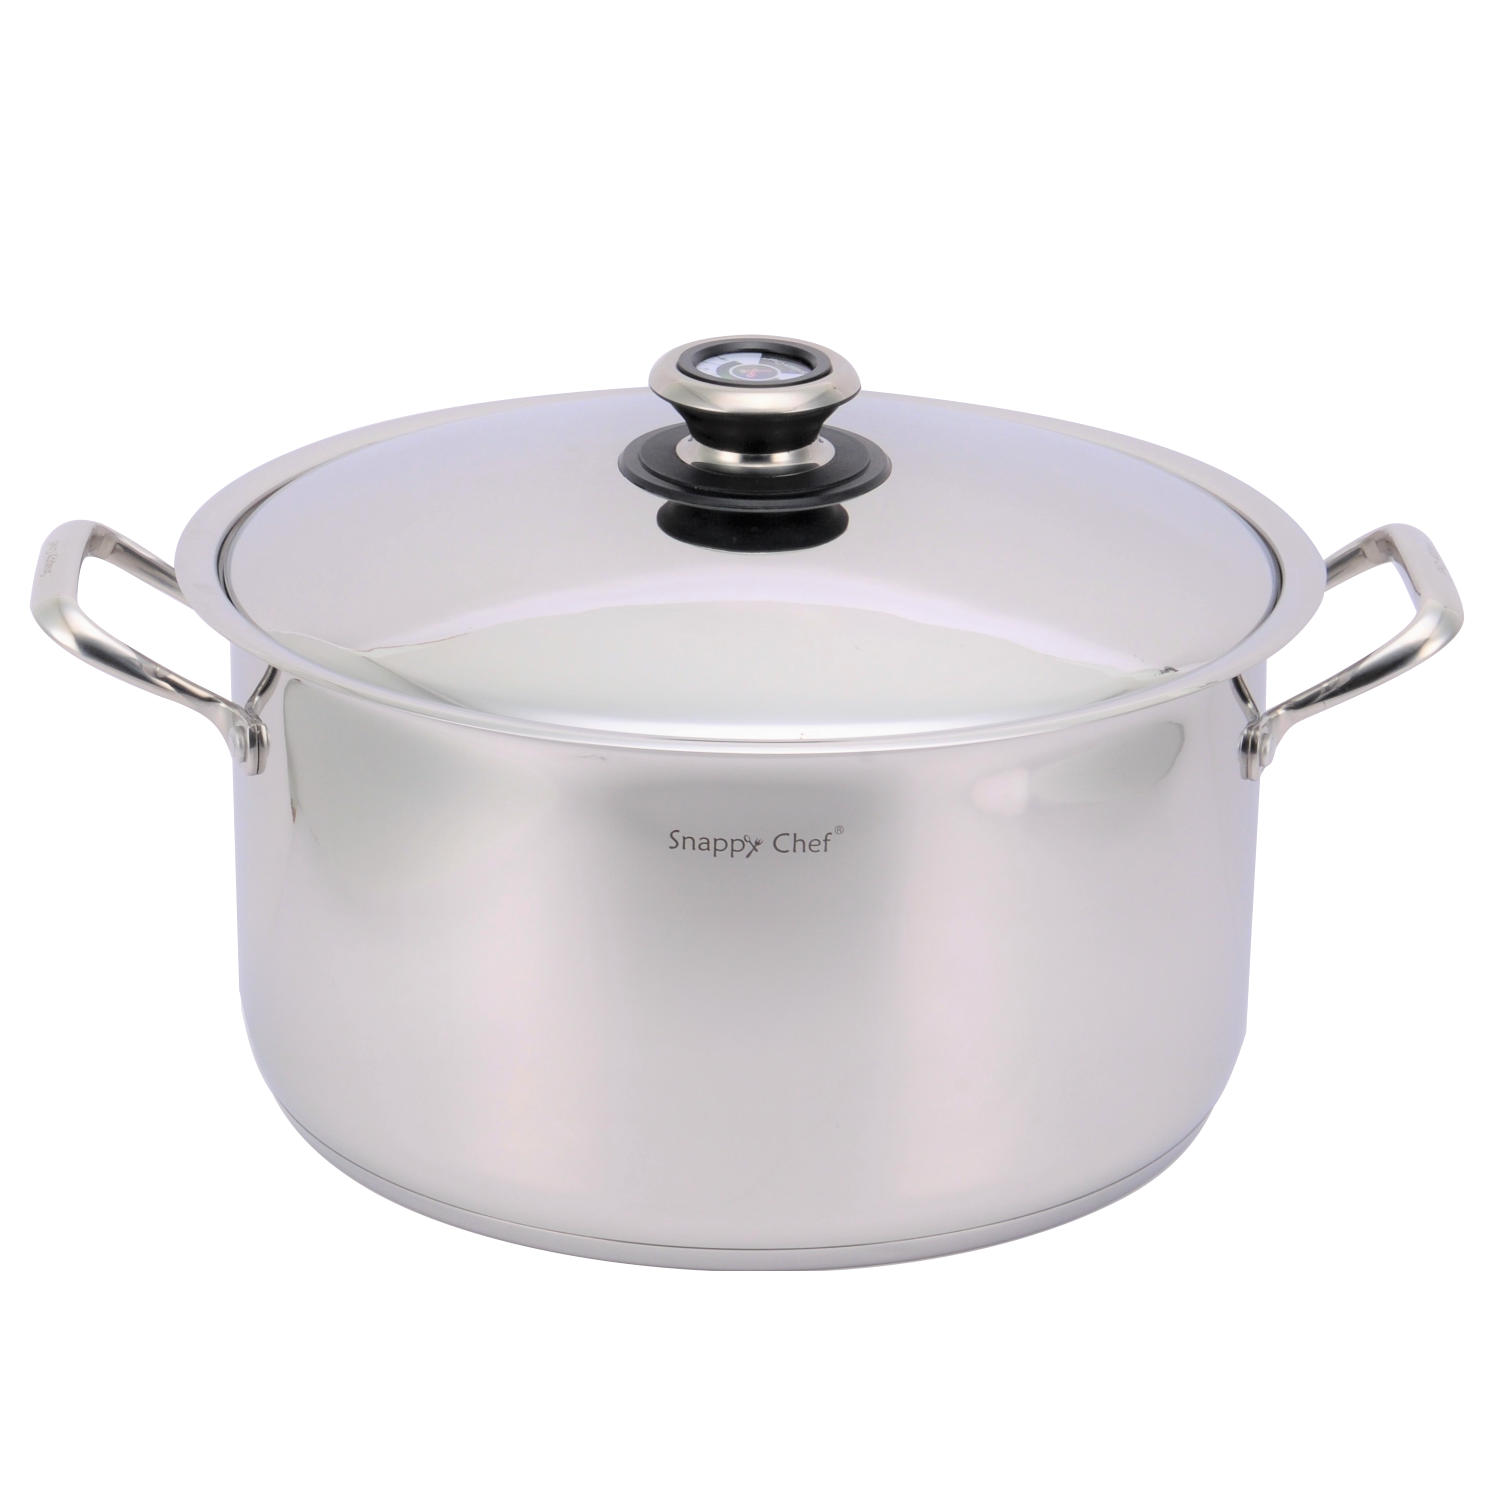 Snappy Chef 14 litre Deluxe Stock Pot | Snappy Chef